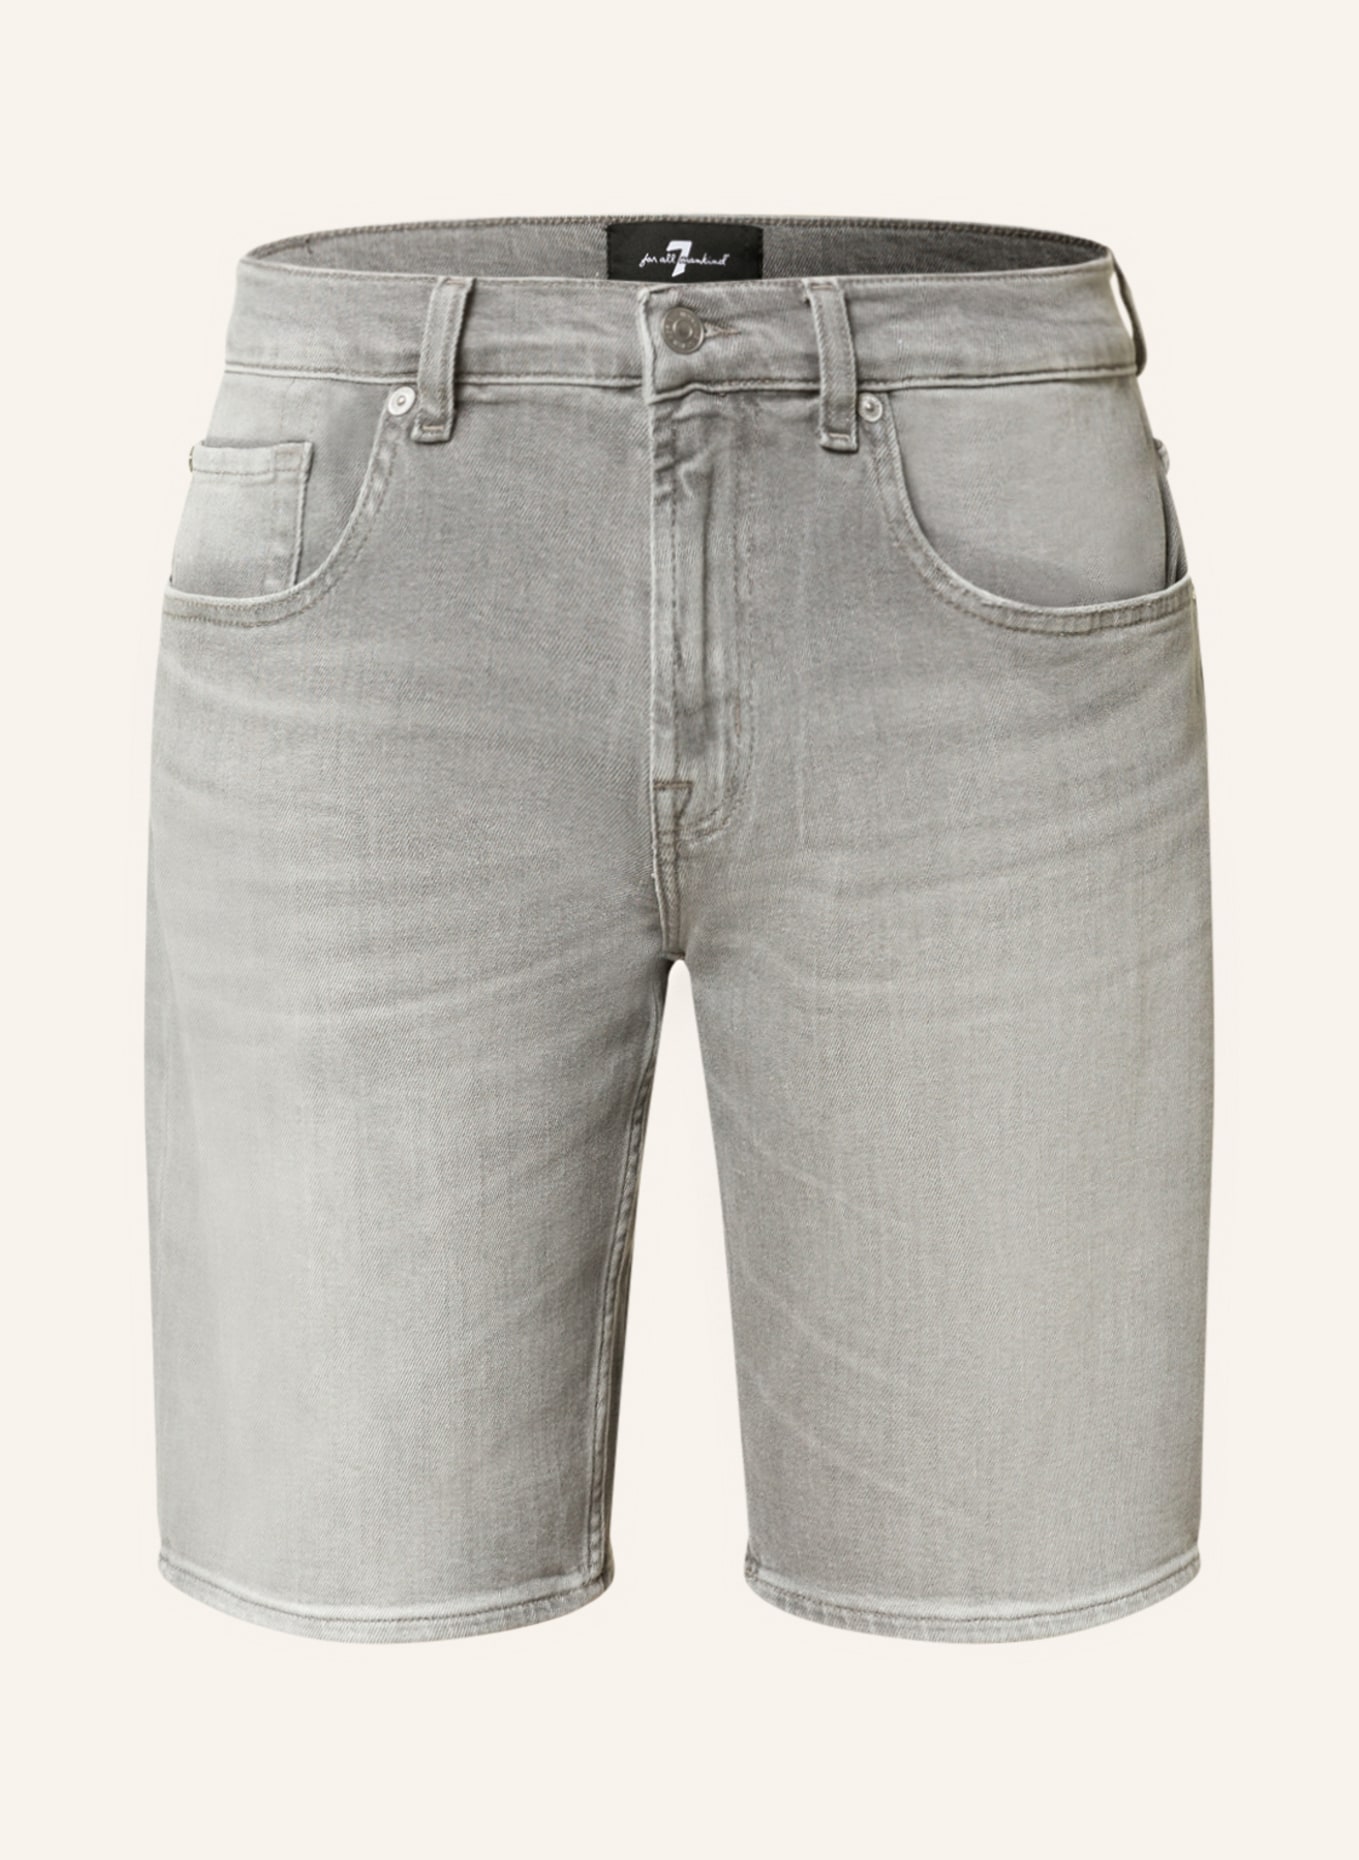 7 for all mankind Jeansshorts SO BADLY Regular Fit, Farbe: GREY (Bild 1)